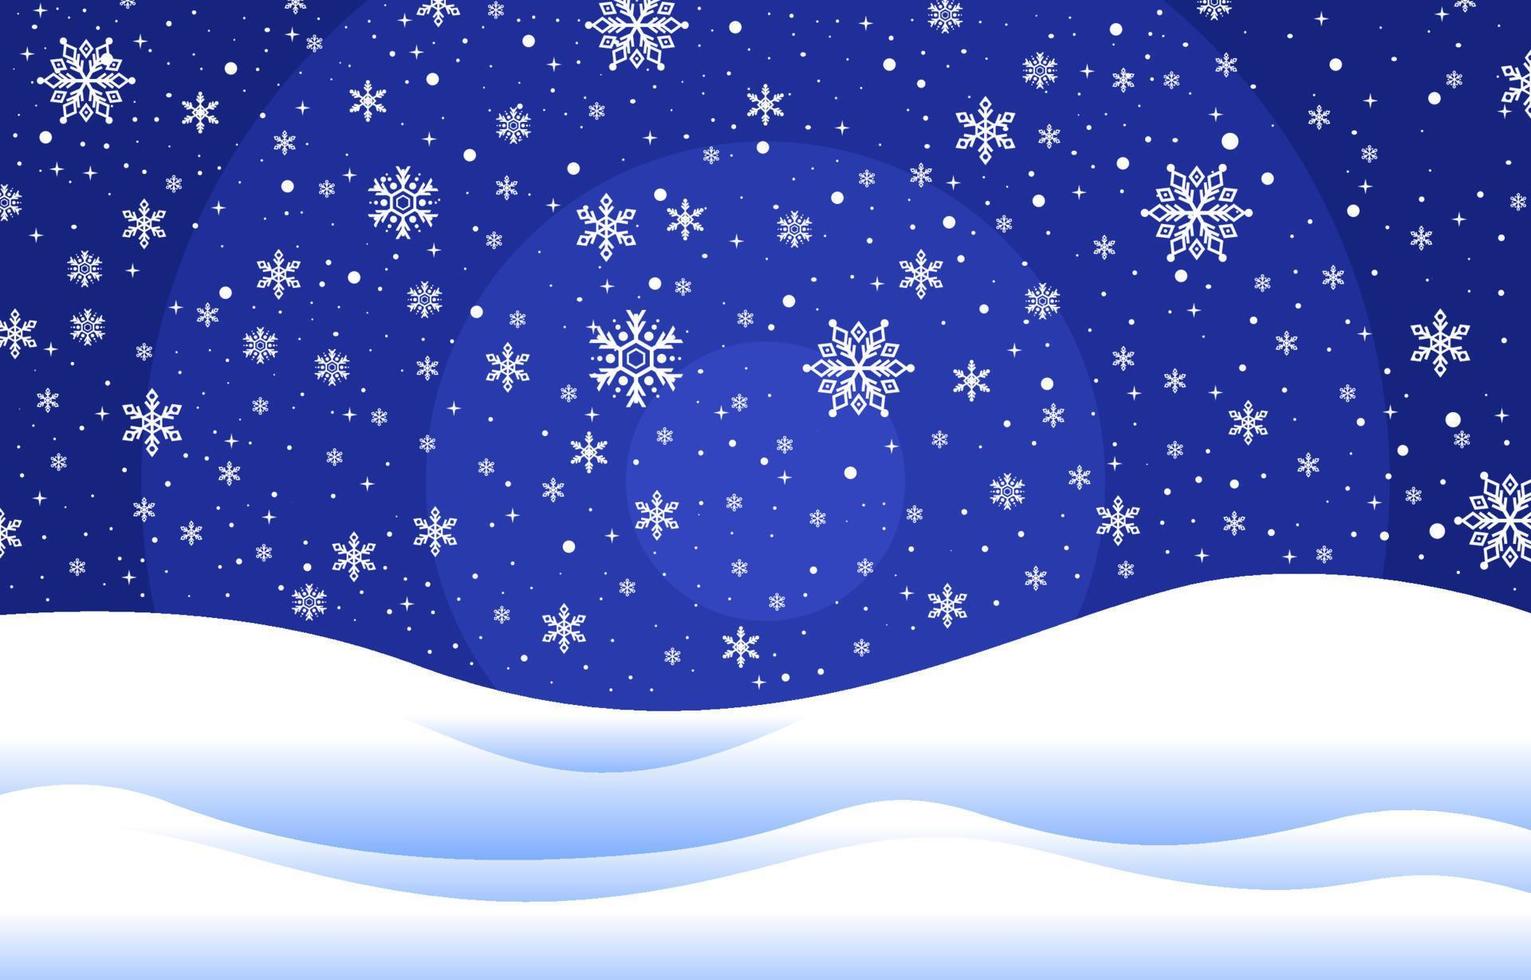 Snowflakes Winter Background vector